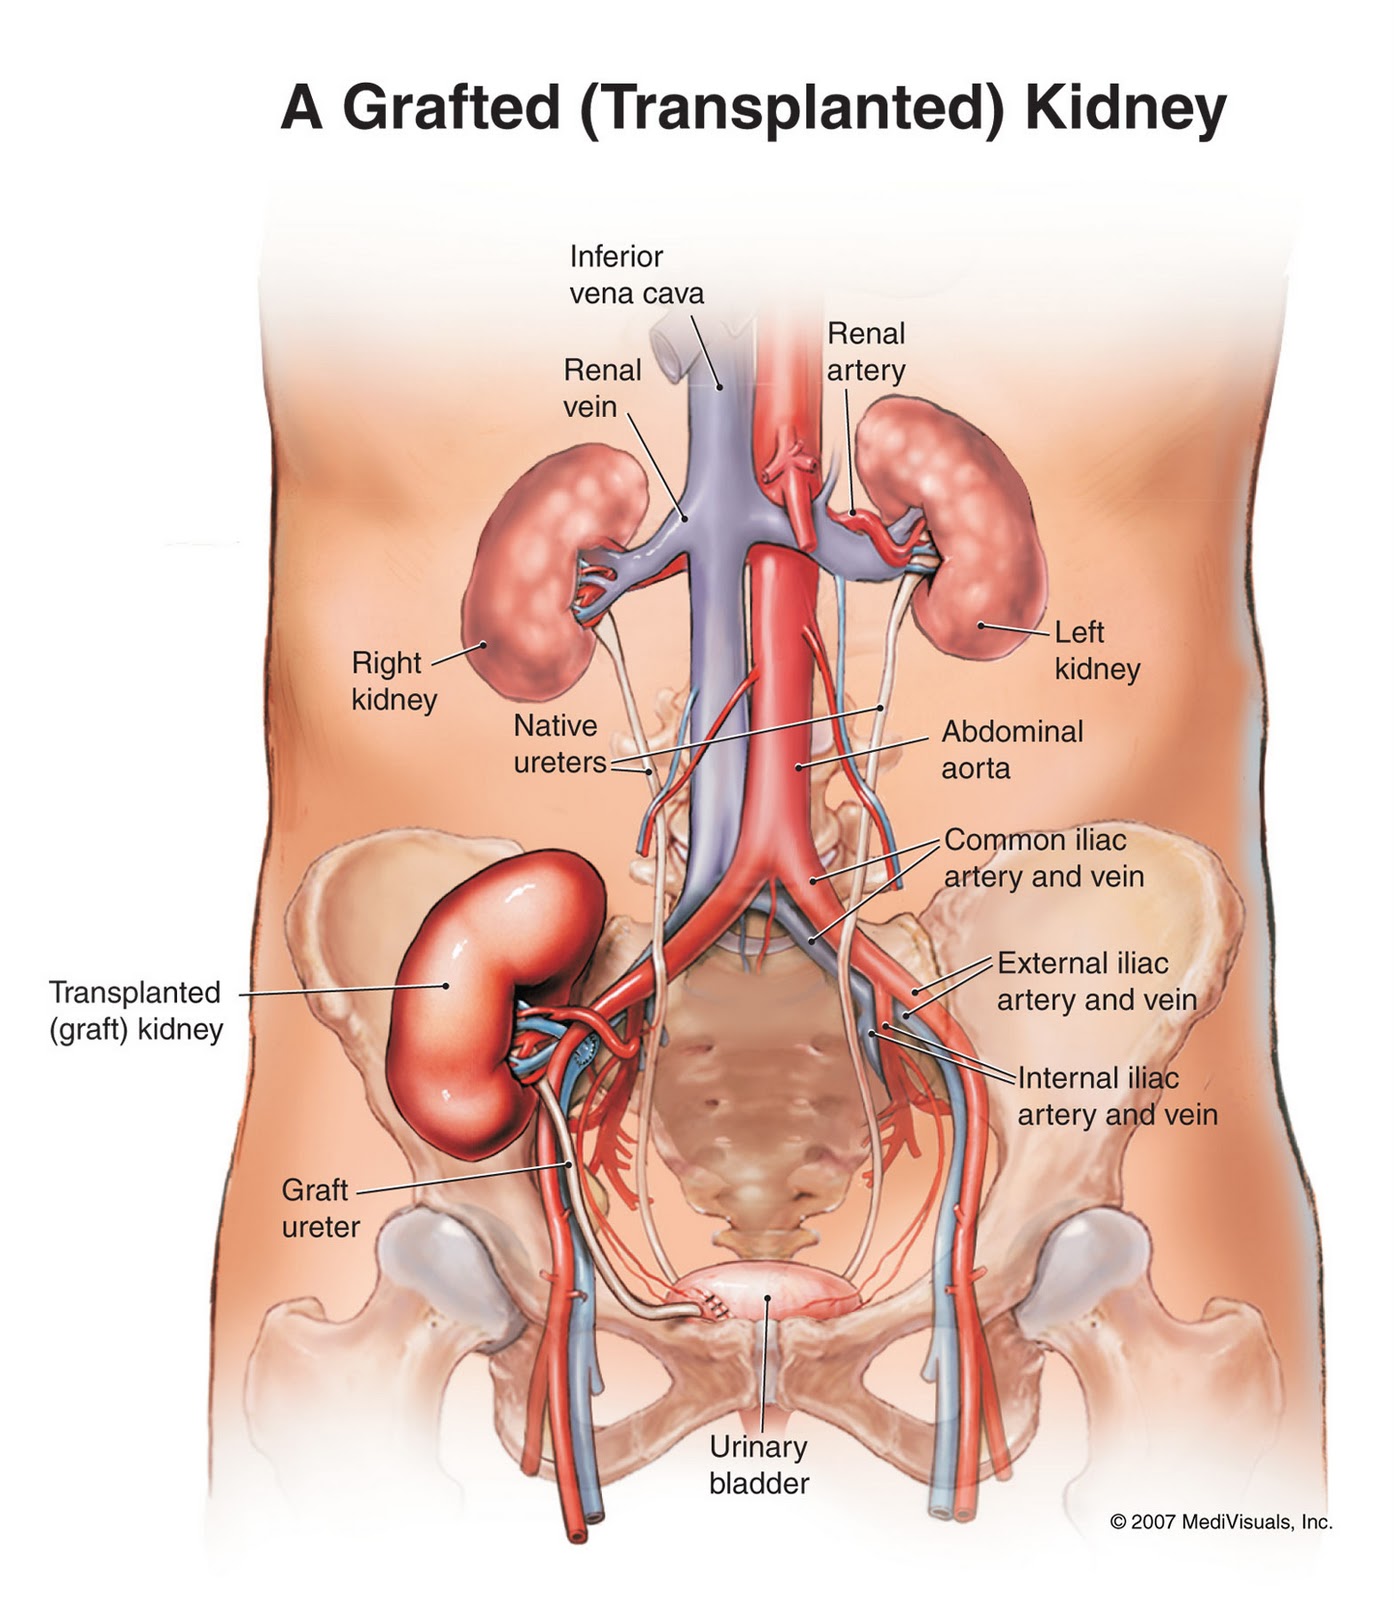 How Many Times Does Your Blood Pass Through The Kidneys On A Daily Basis